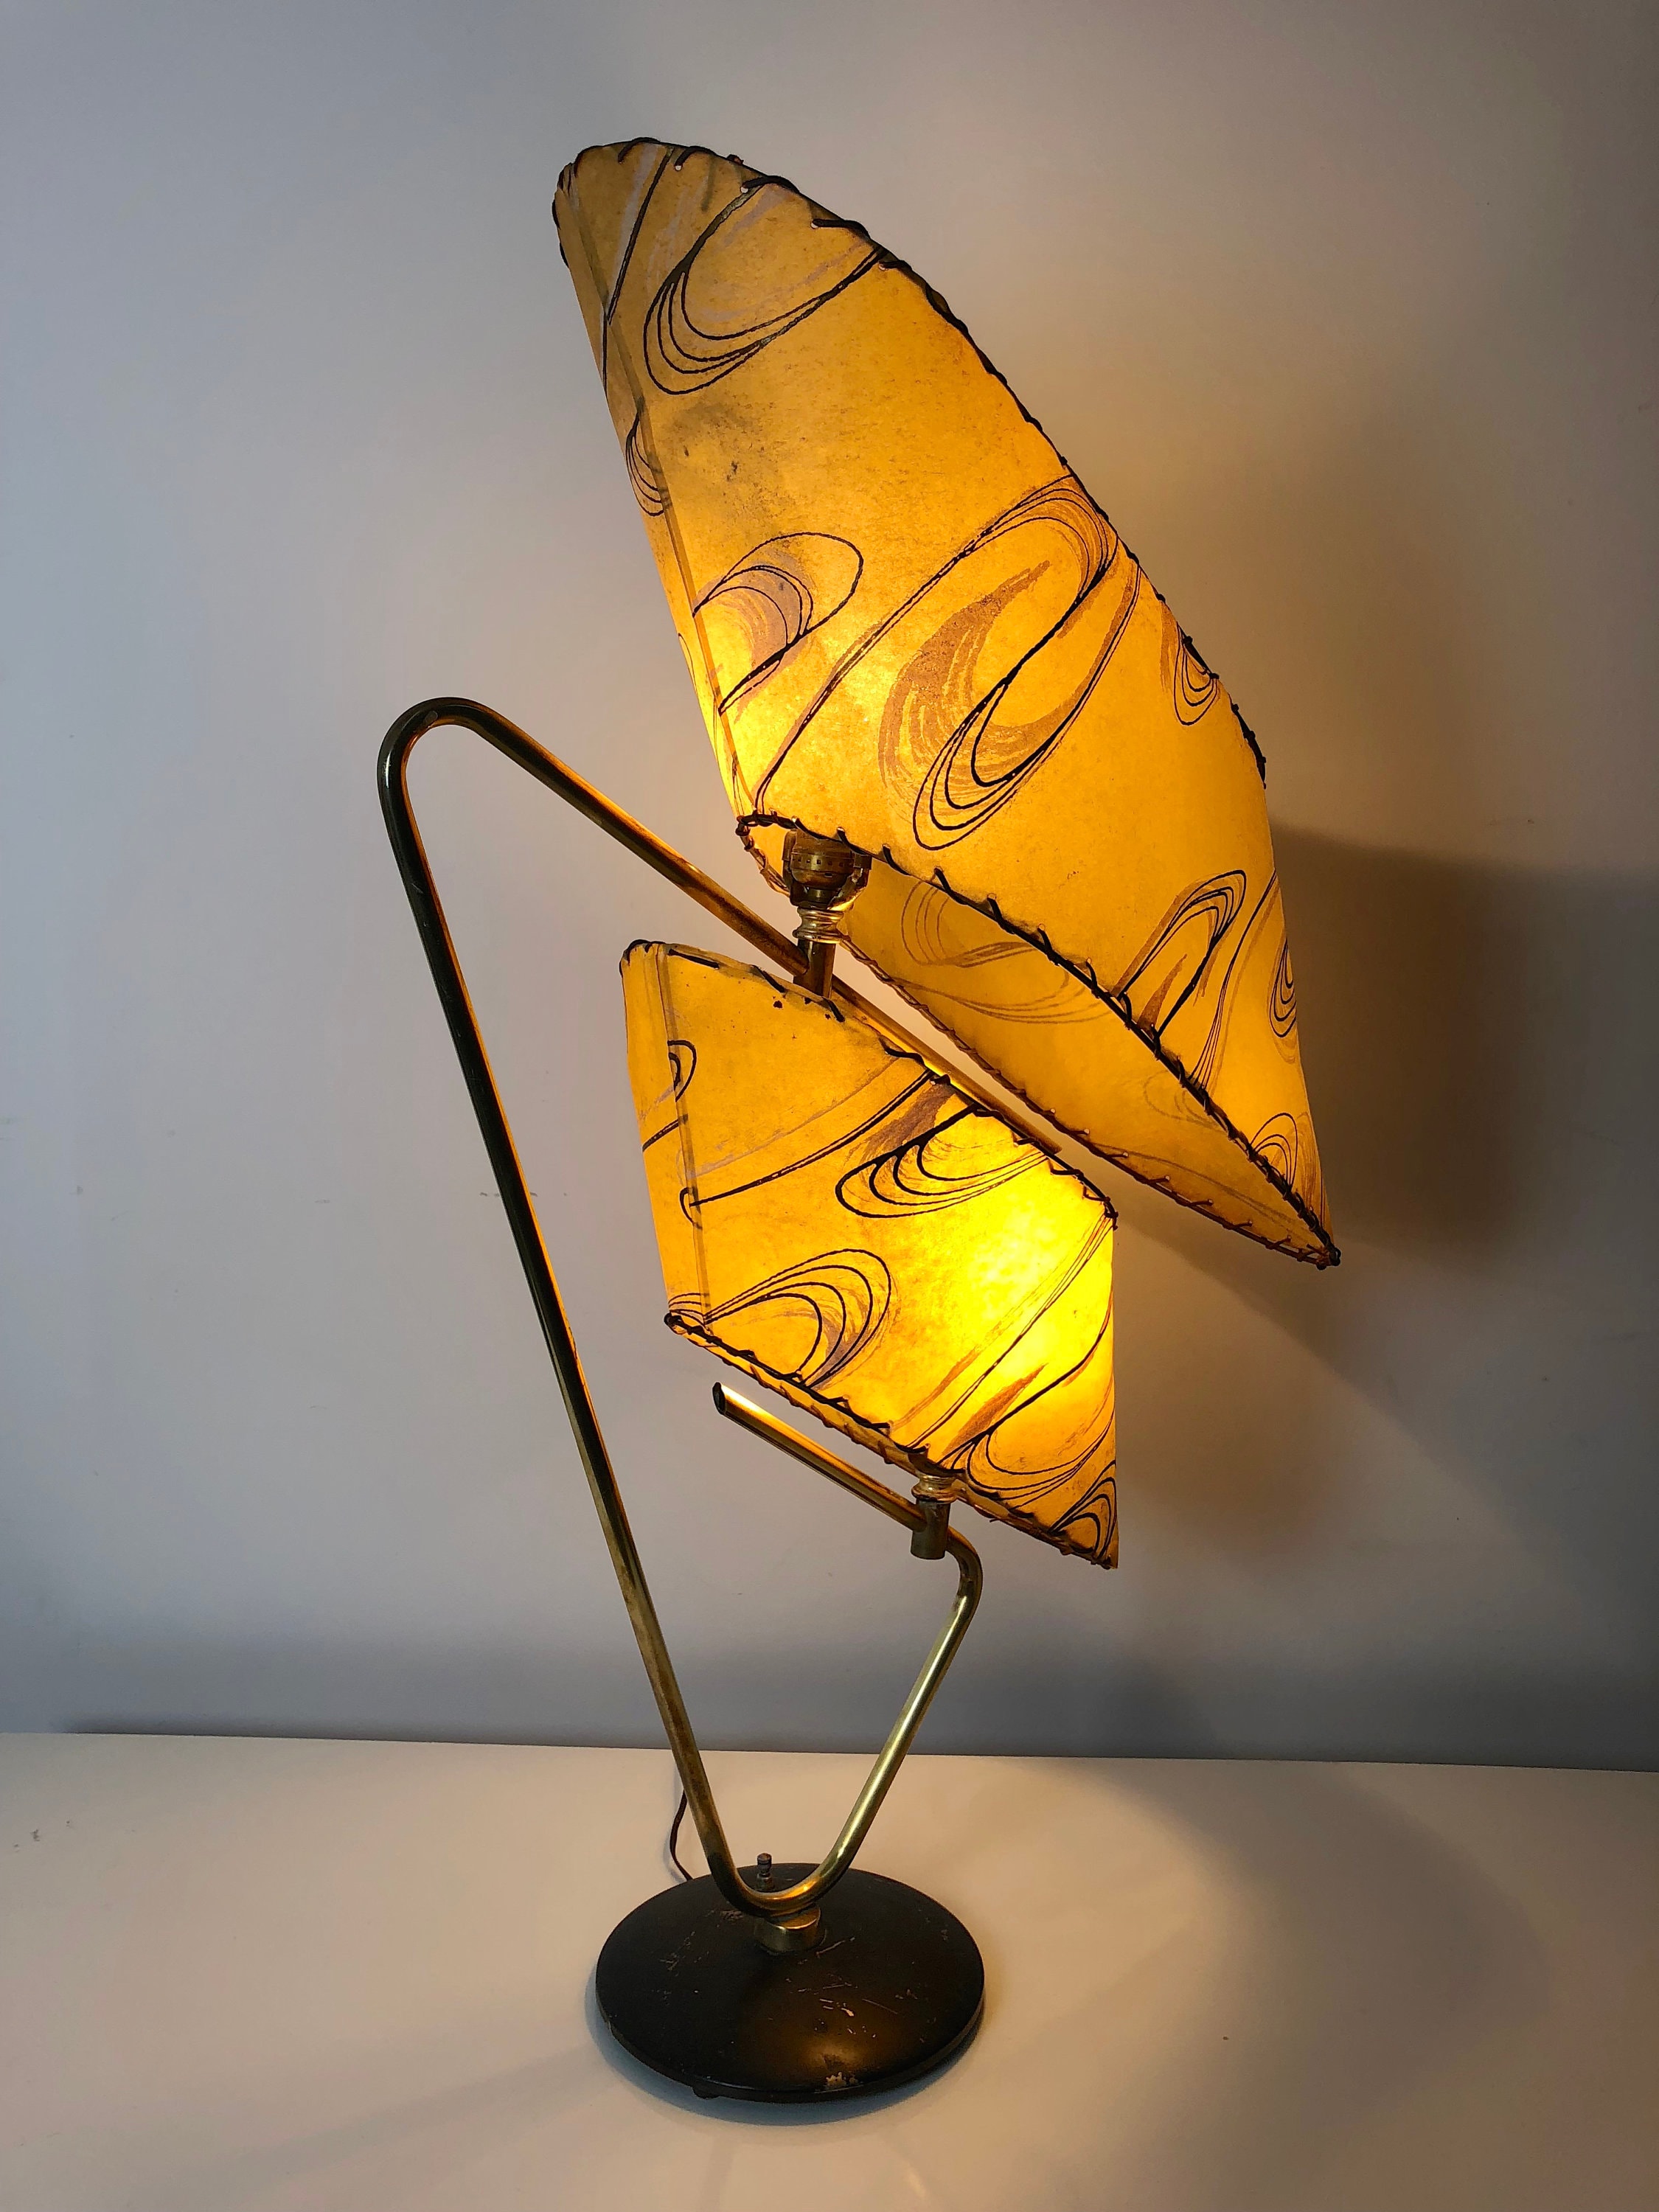 Vintage Atomic Table Lamp attributed to Majestic, 1950's